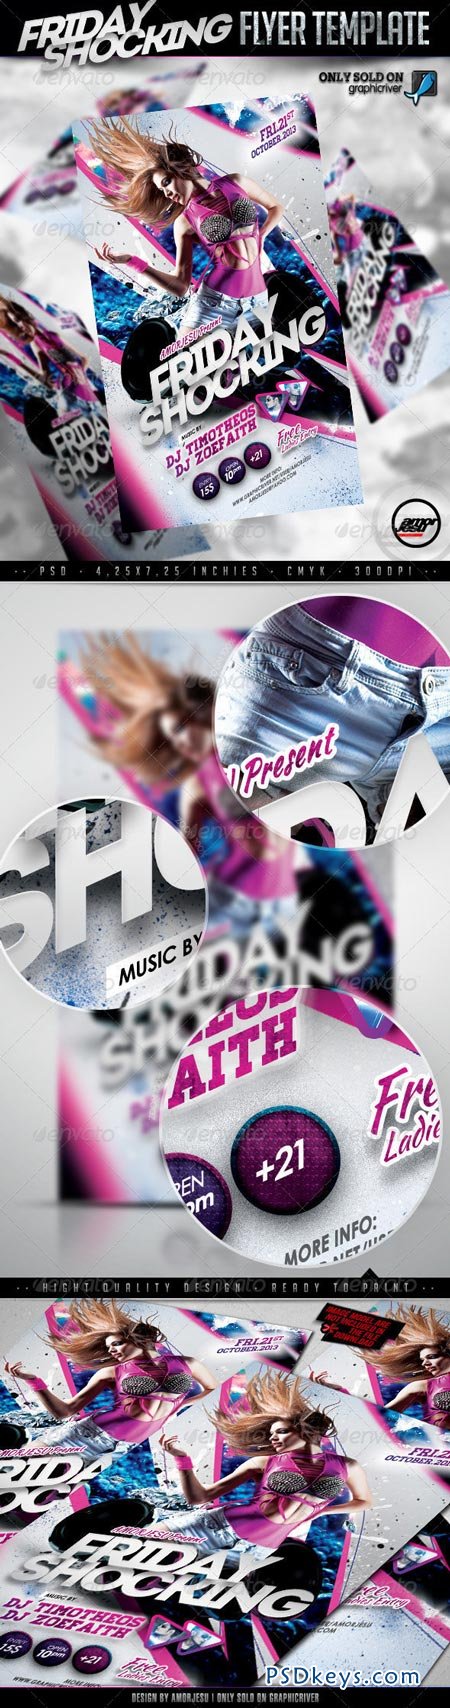 Friday Shocking Flyer Template 5425964